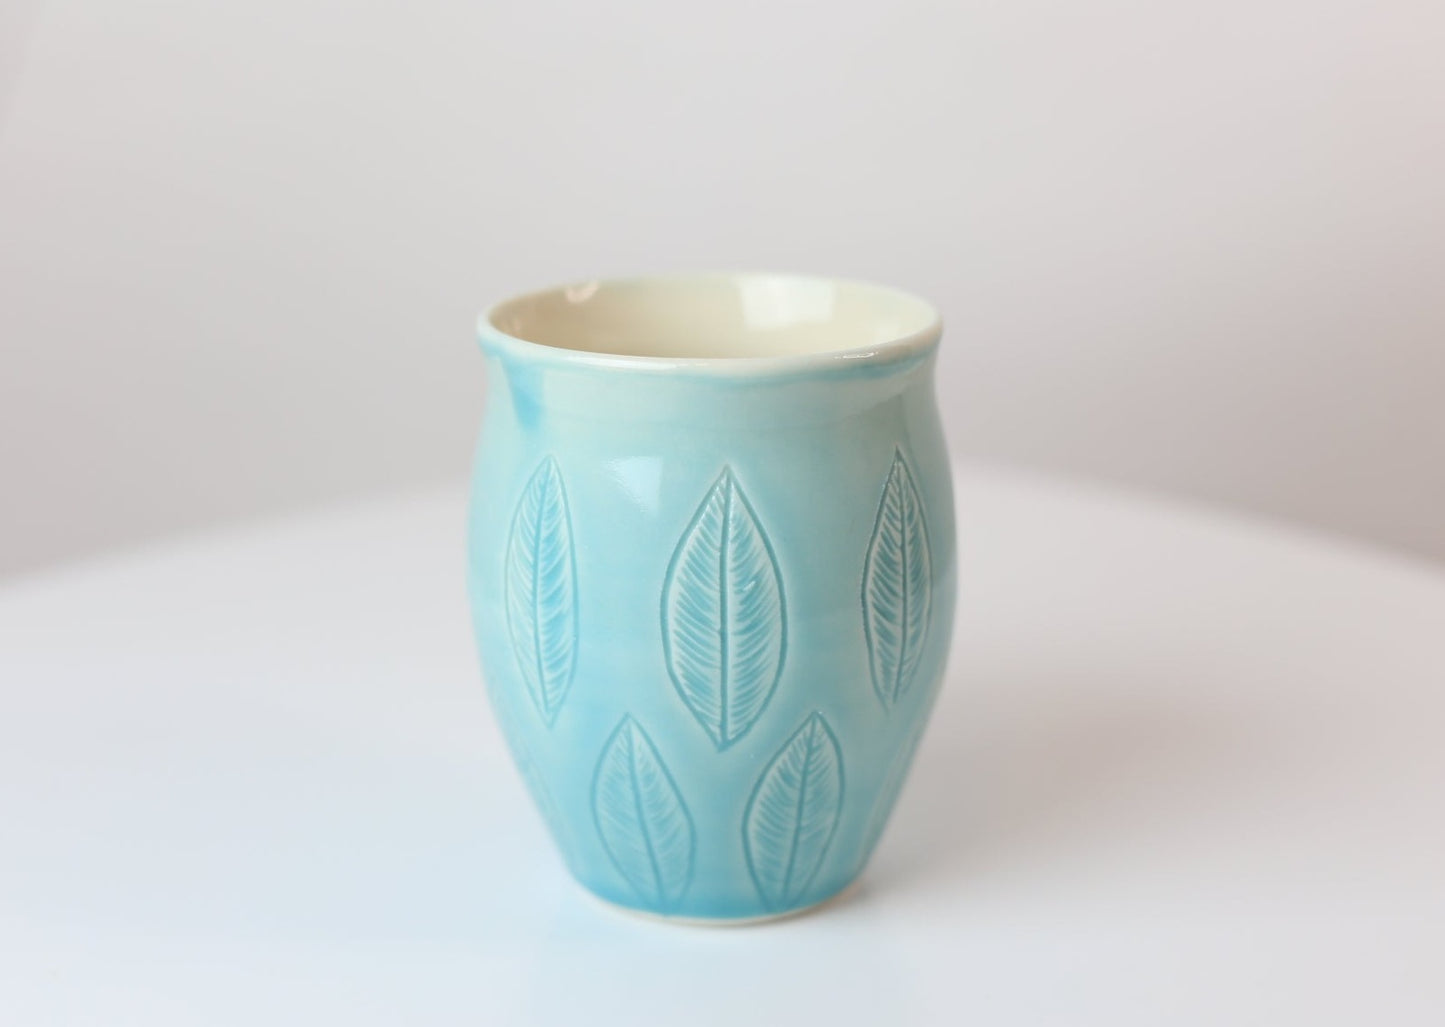 12 oz porcelain mug with carved leaves in turquoise